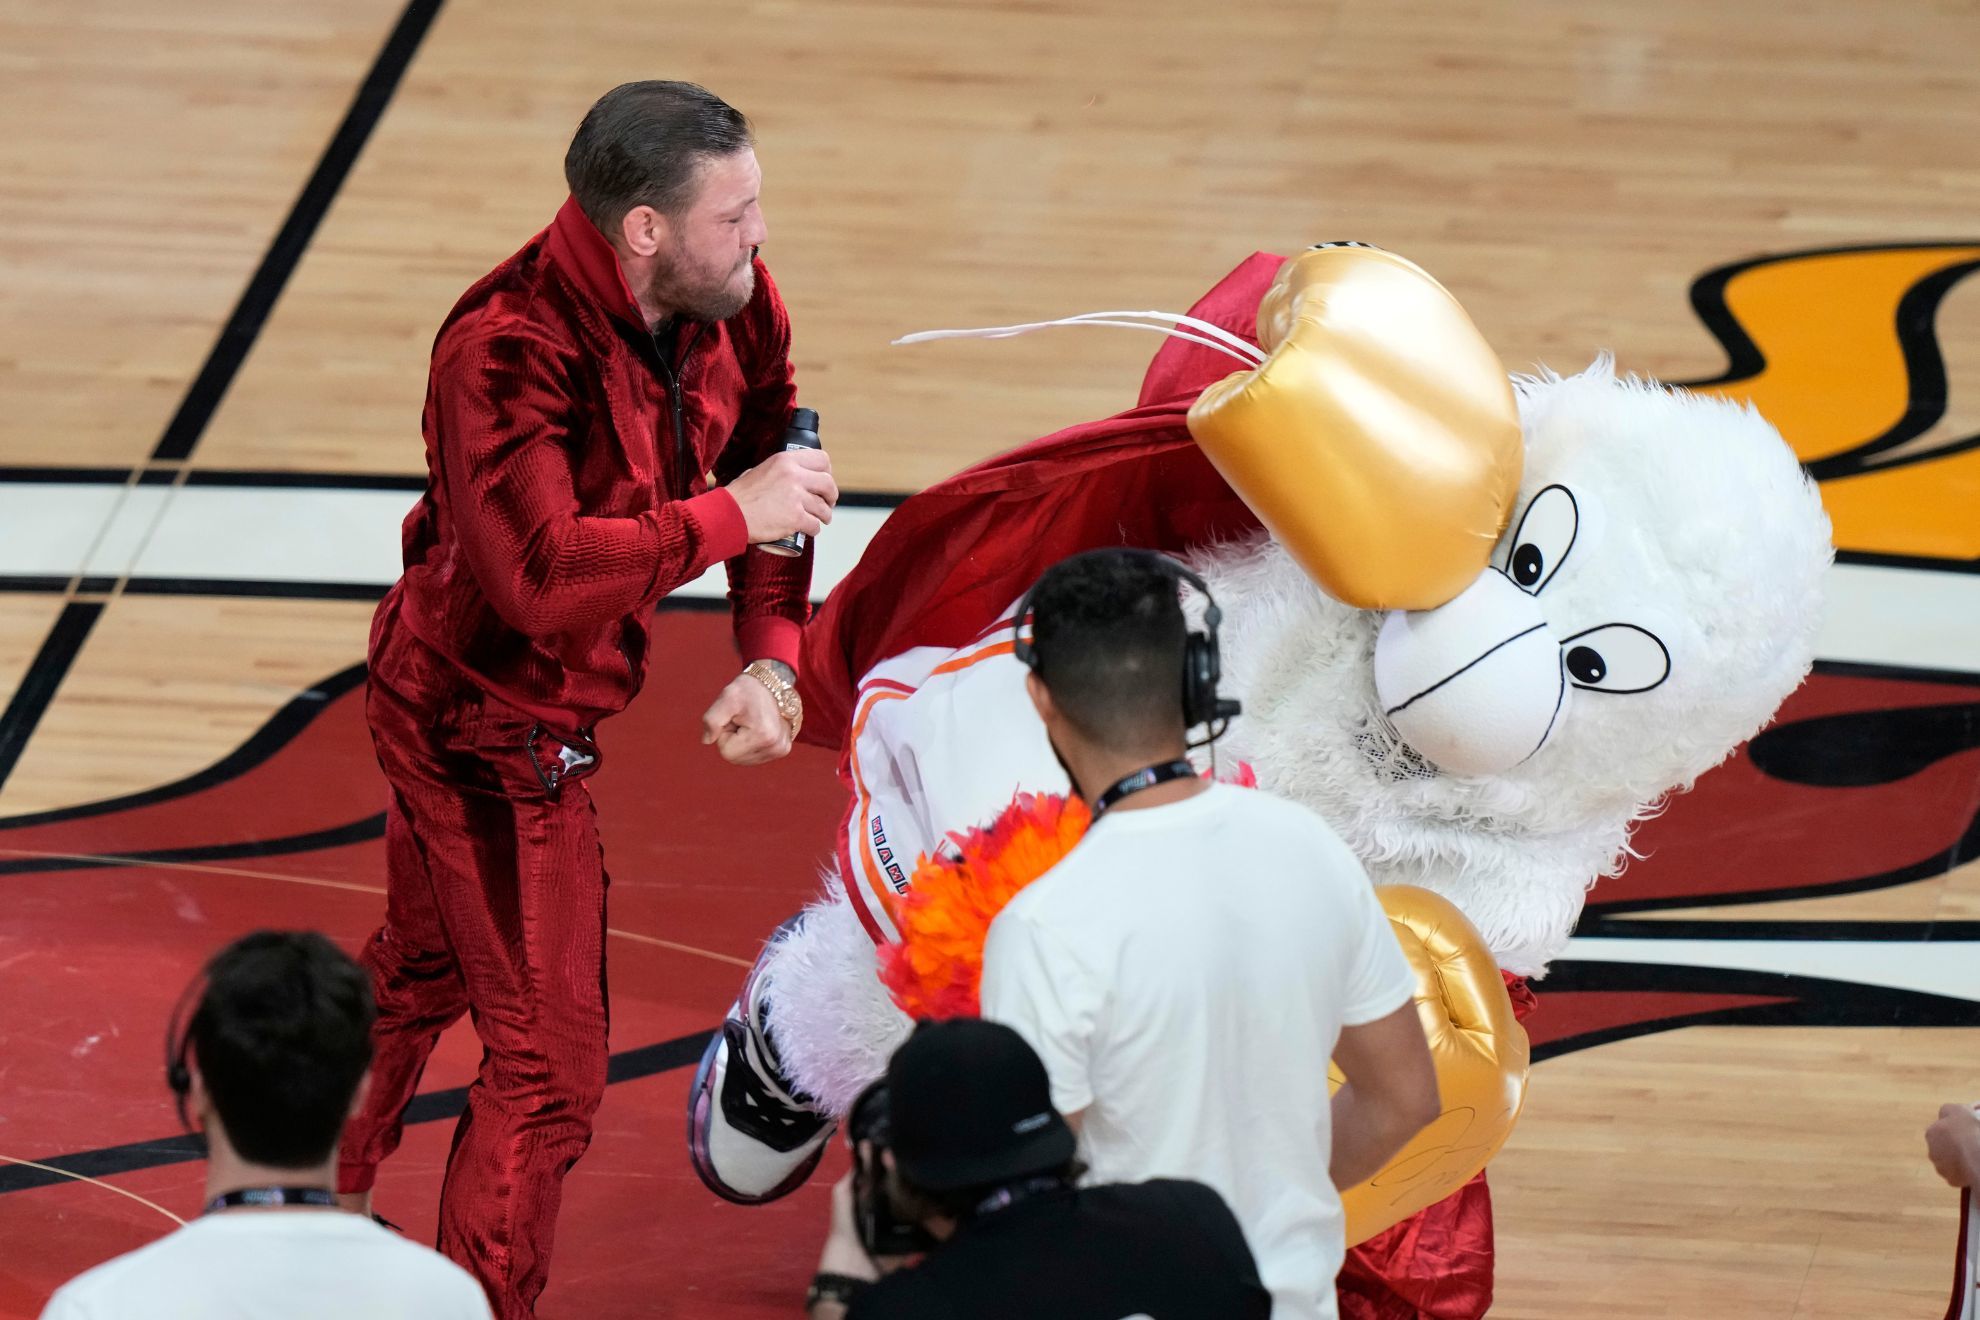 Conor McGregor sends Heat mascot Burnie to ER after punching him twice